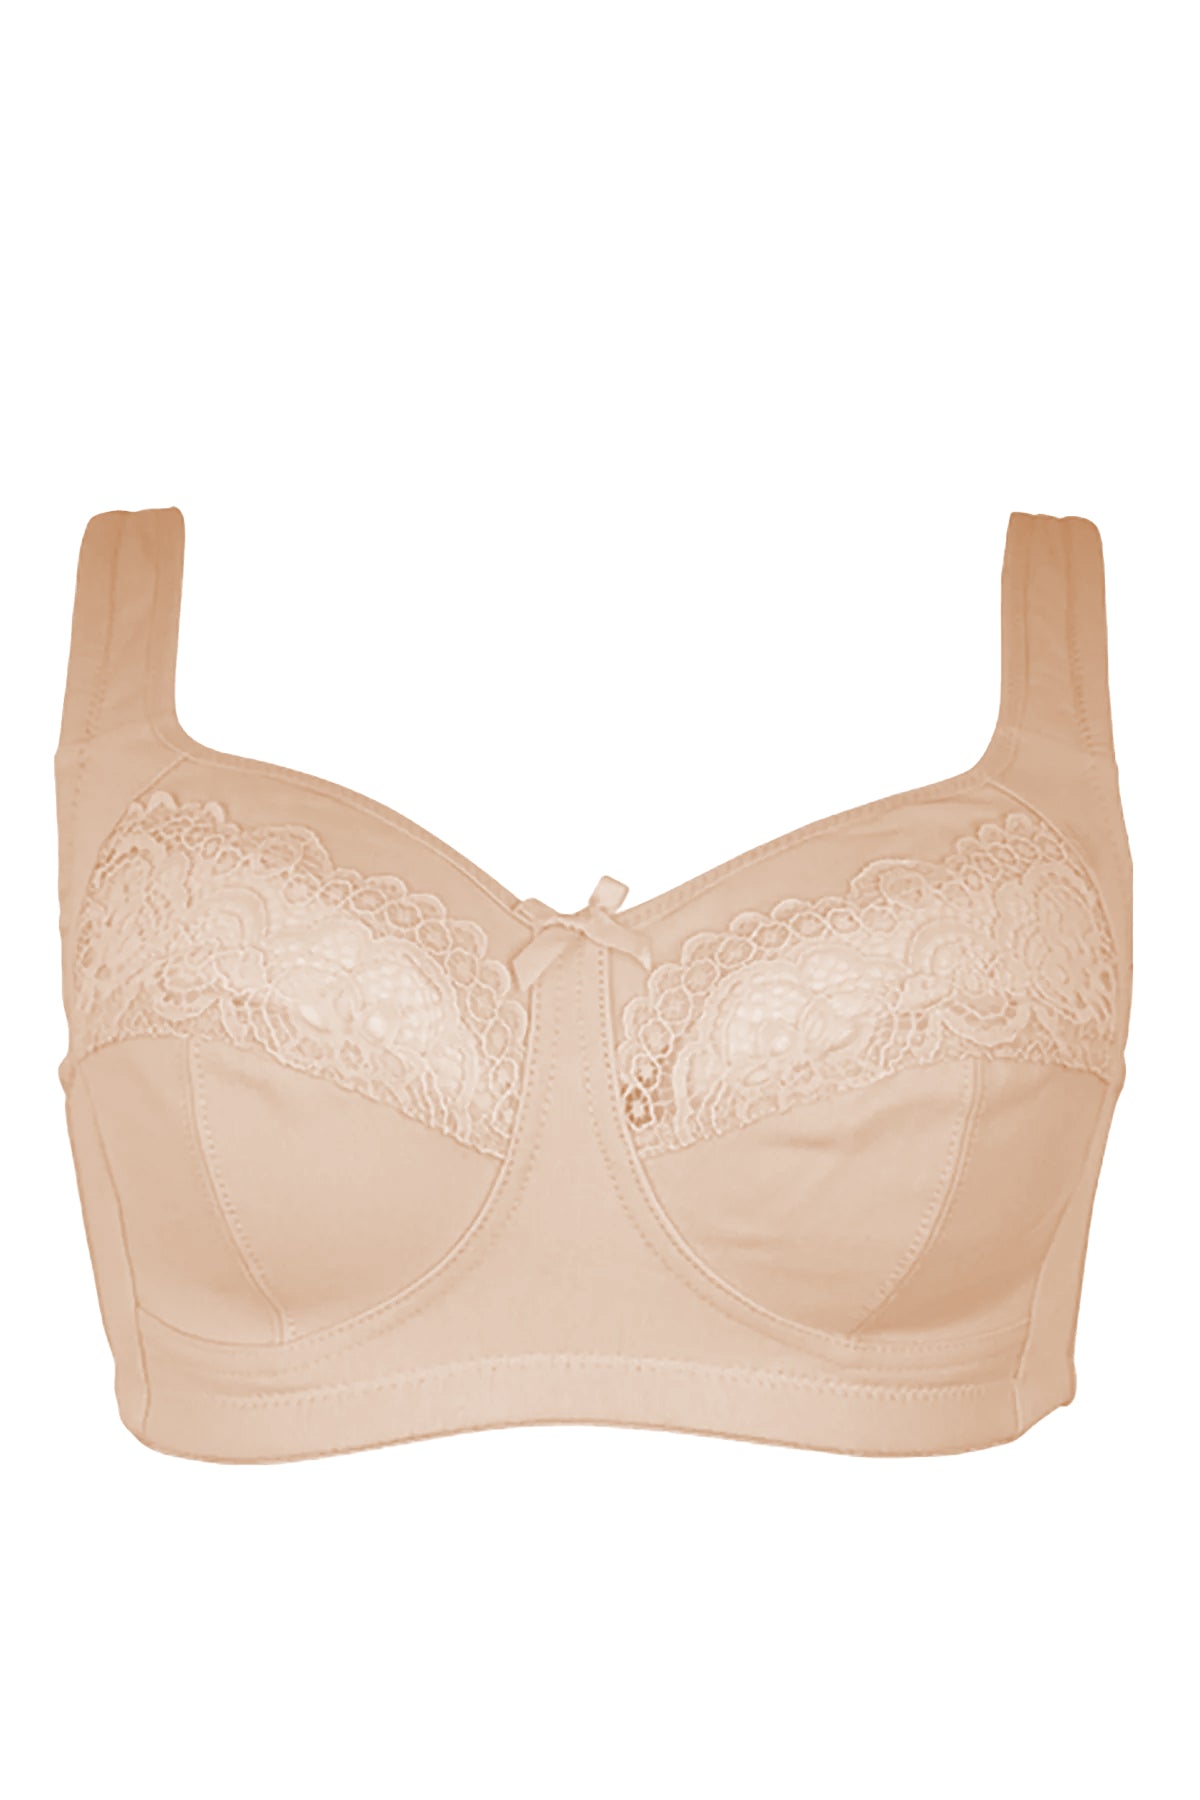 BLS - Carole Non Wired And Non Padded Cotton Bra - White – Makeup City  Pakistan